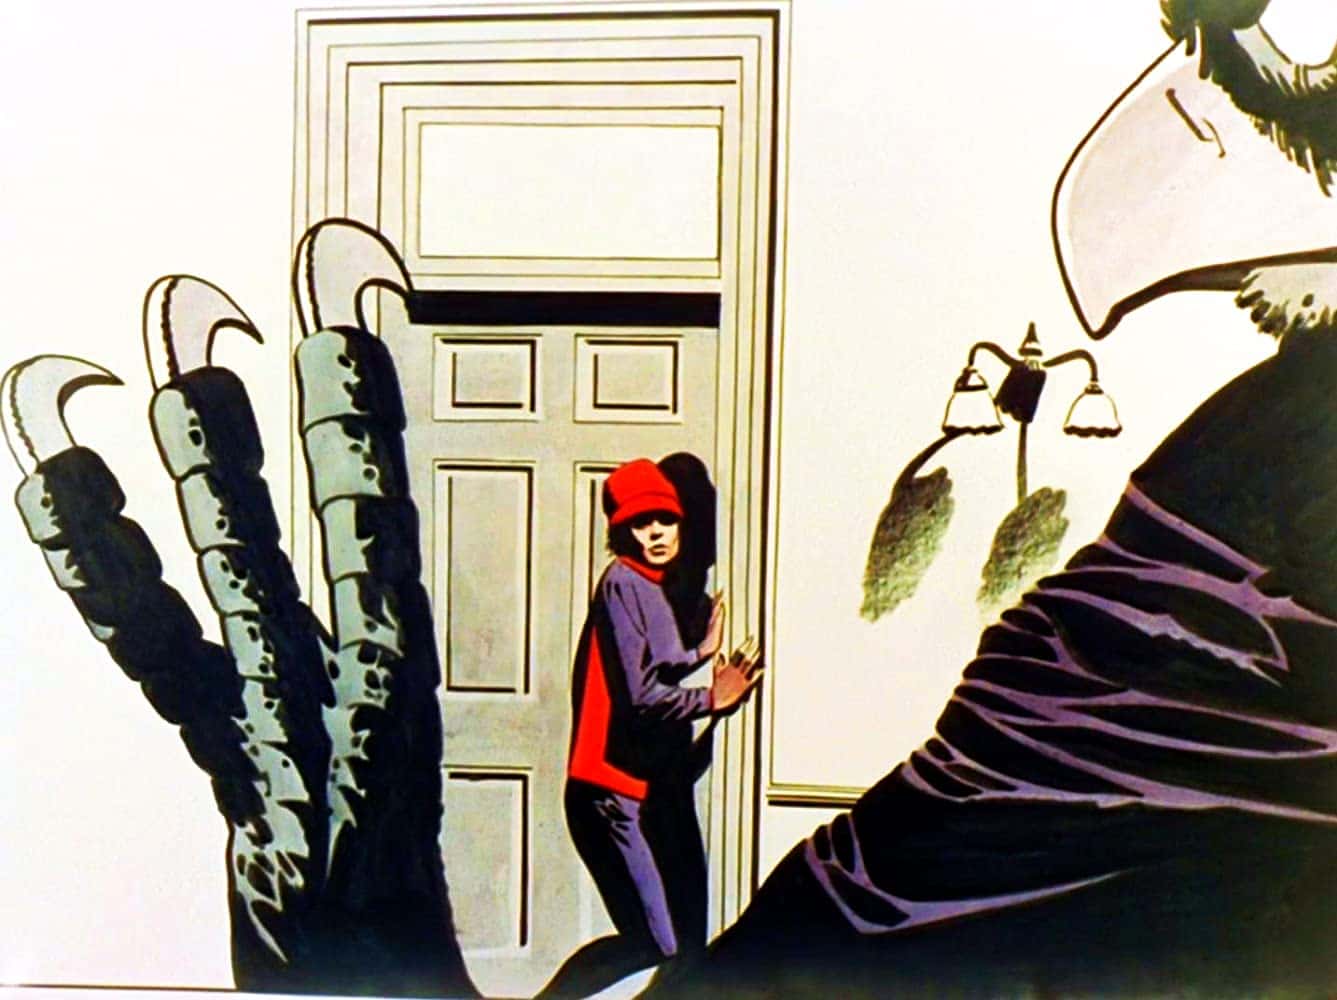 Emma Peel in cartoon form being menaged by a giant bird